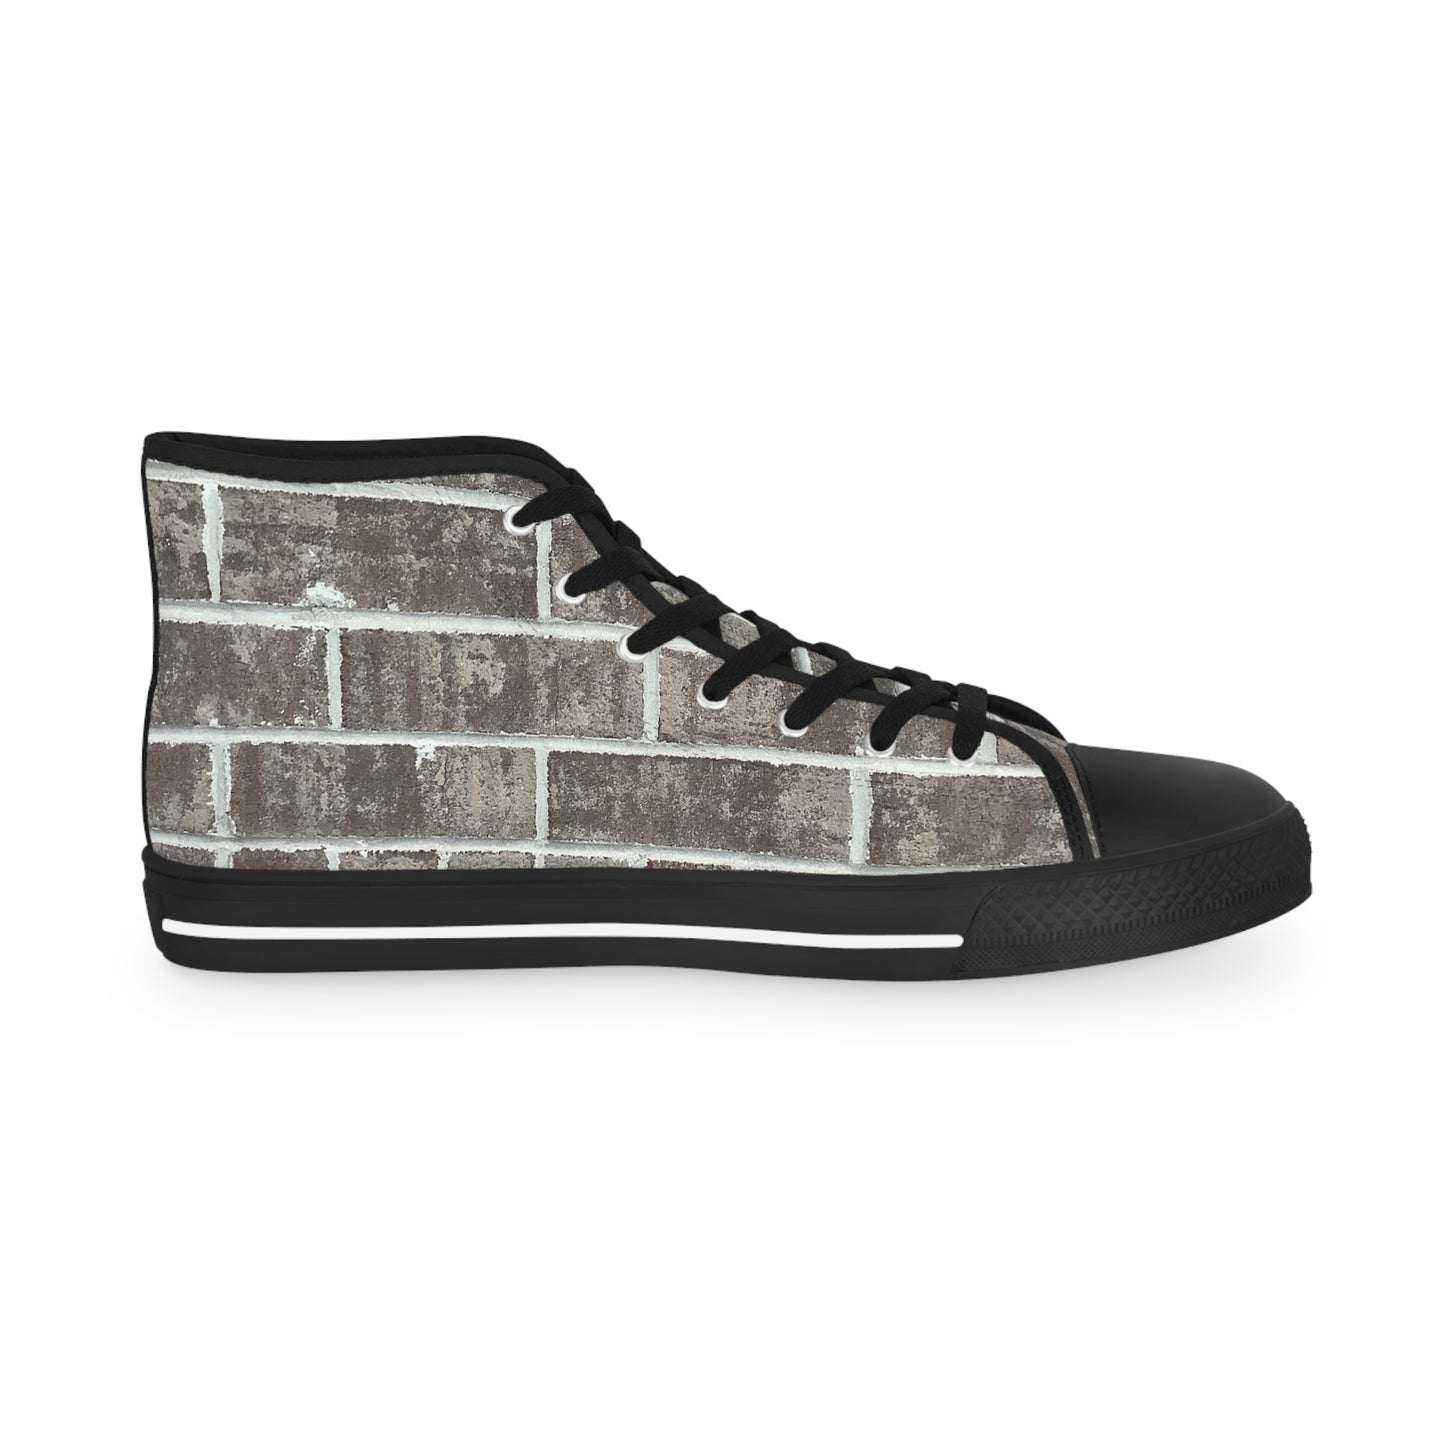 Limited Edition High Top Sneakers - Bushed